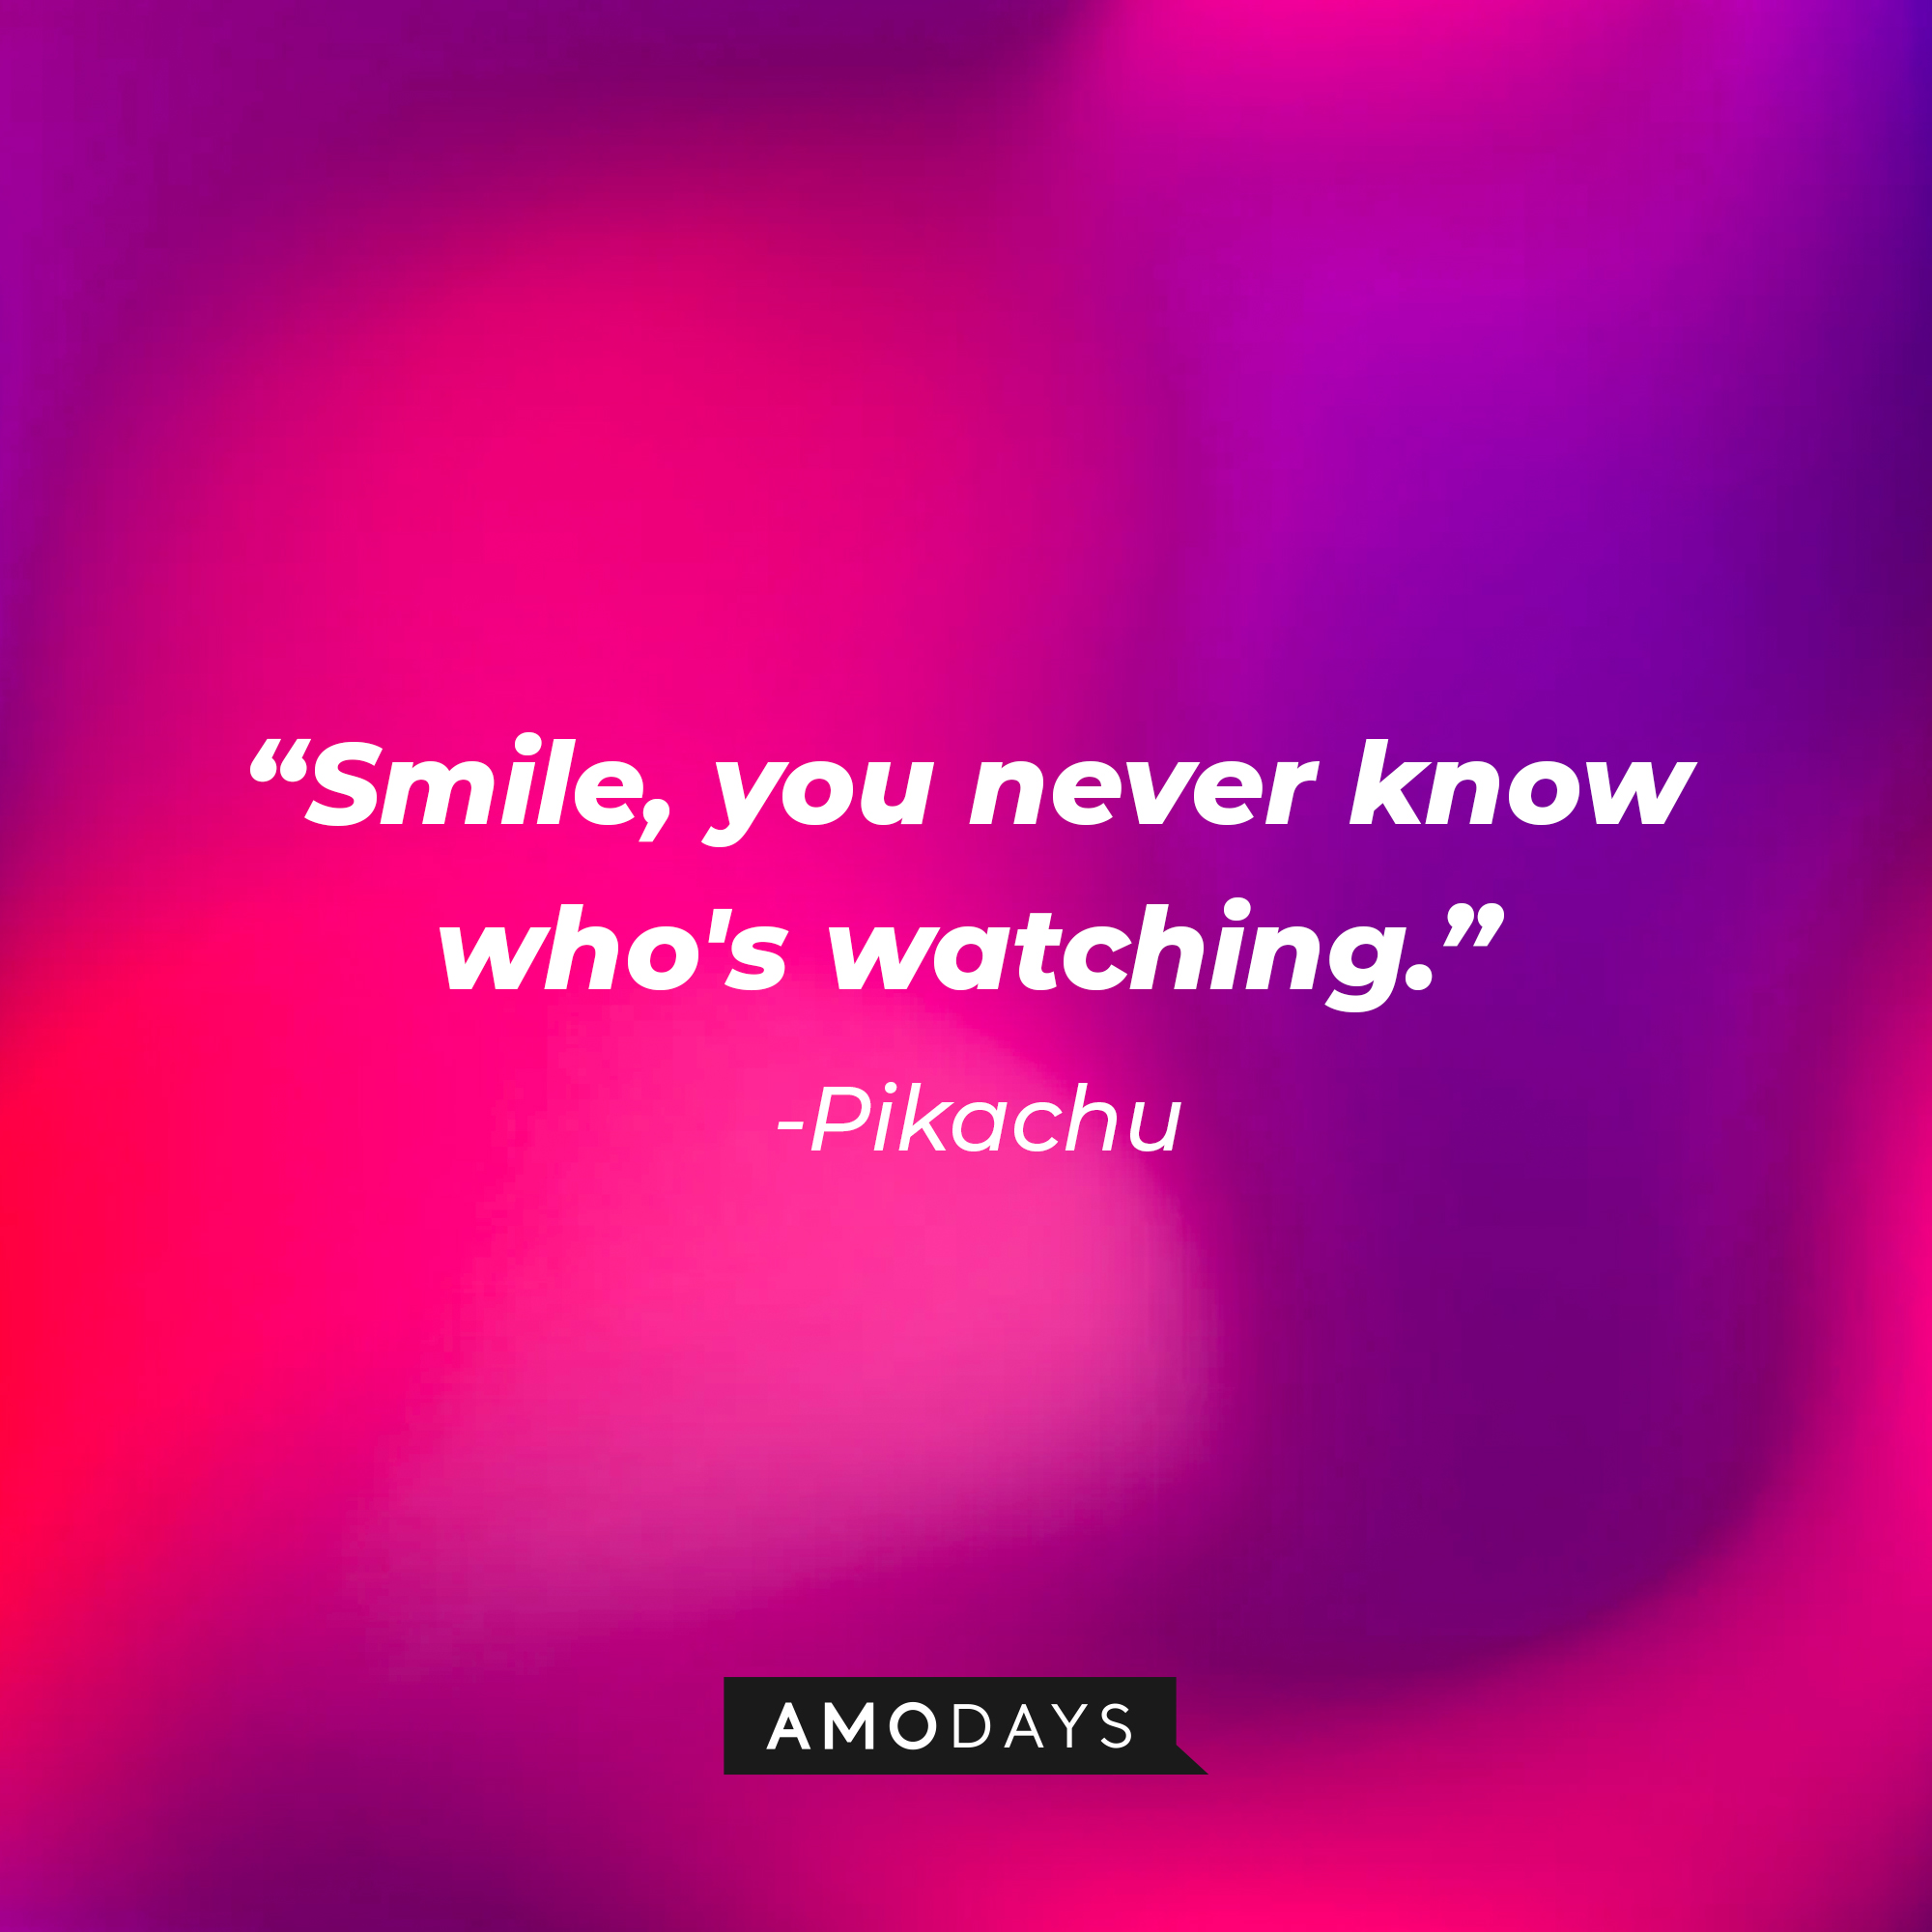 Pikachu's quote: "Smile, you never know who's watching." | Source: AmoDays